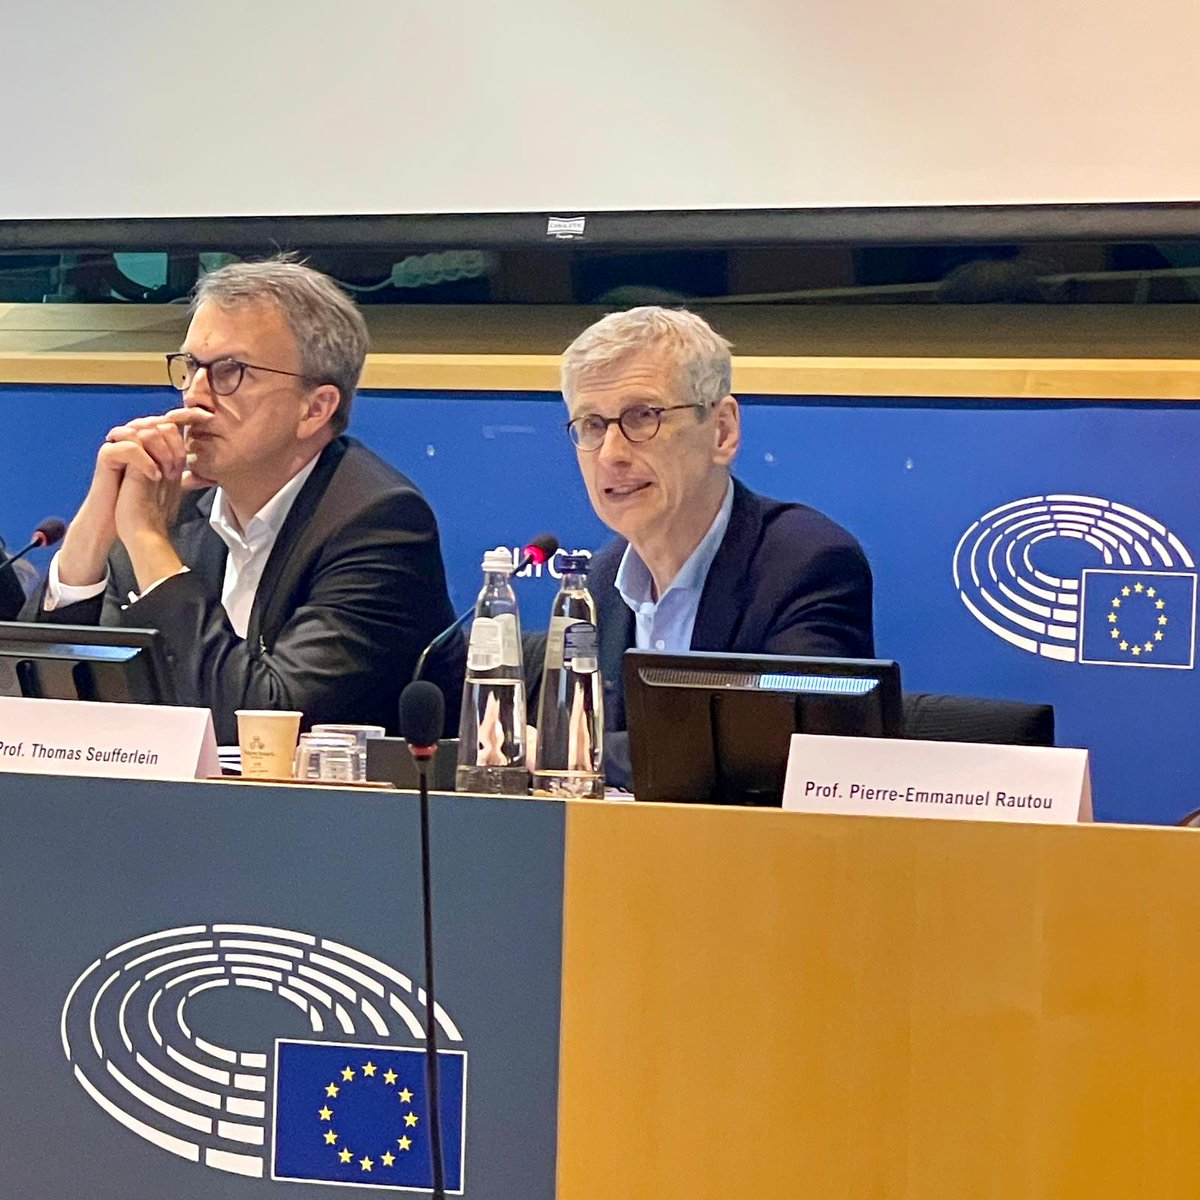 '40 % of all cancers could be preventable,' highlights Prof Seufferlein from the European Society of Digestive Oncology at @my_ueg event happening today in #EuropeanParliament #Brussels! #digestivehealth #digestivecancers #diseaseprevention #myUEGcommunity #EUNewsline